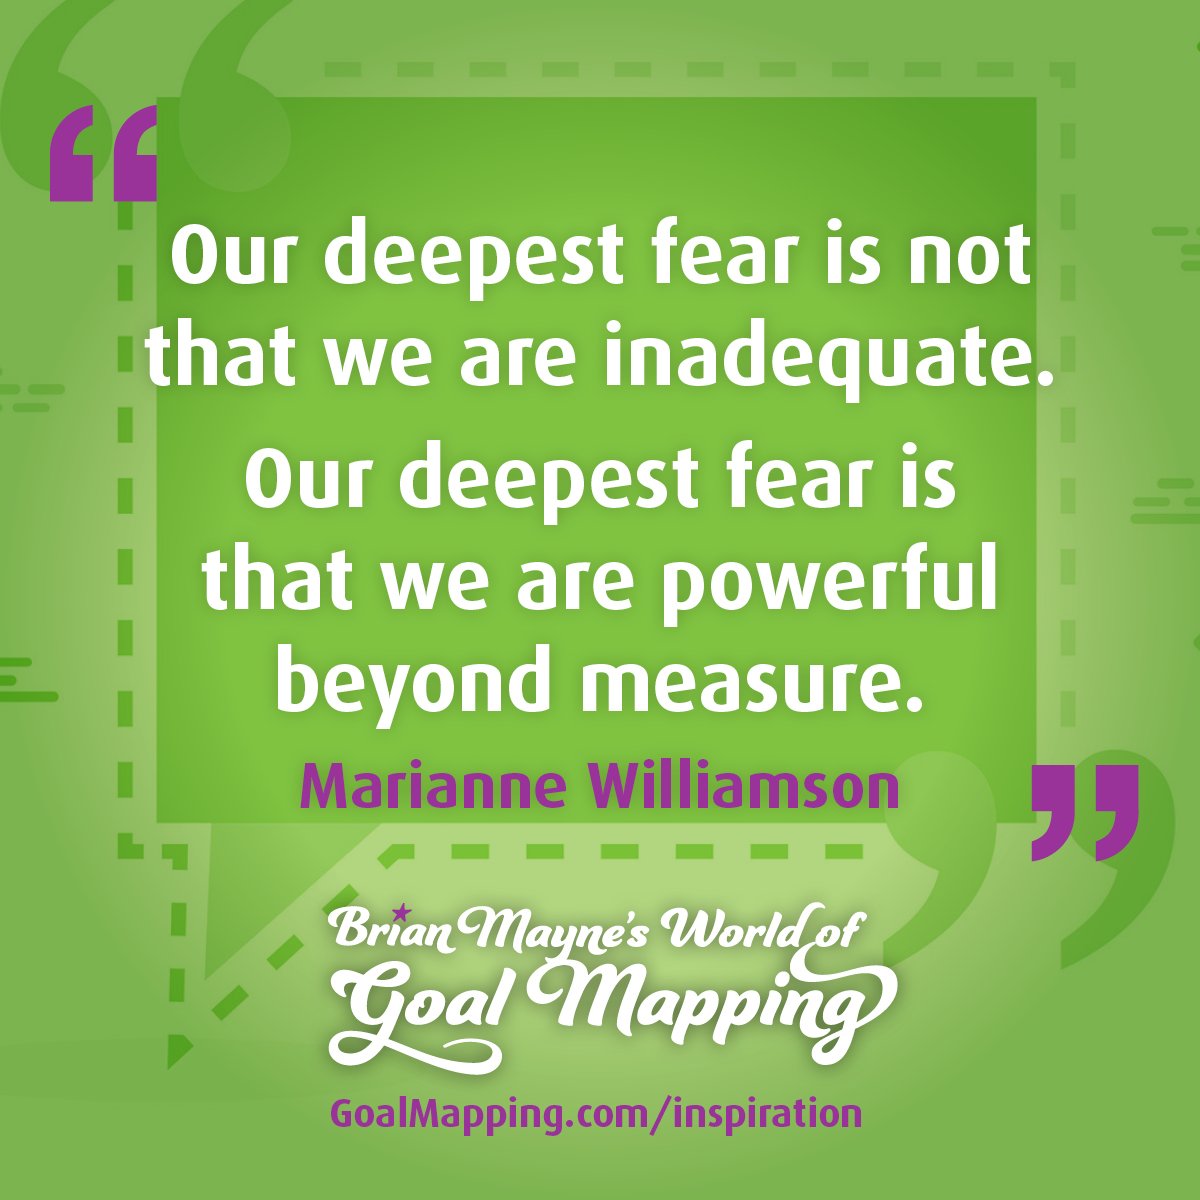 "Our deepest fear is not that we are inadequate. Our deepest fear is that we are powerful beyond measure." Marianne Williamson